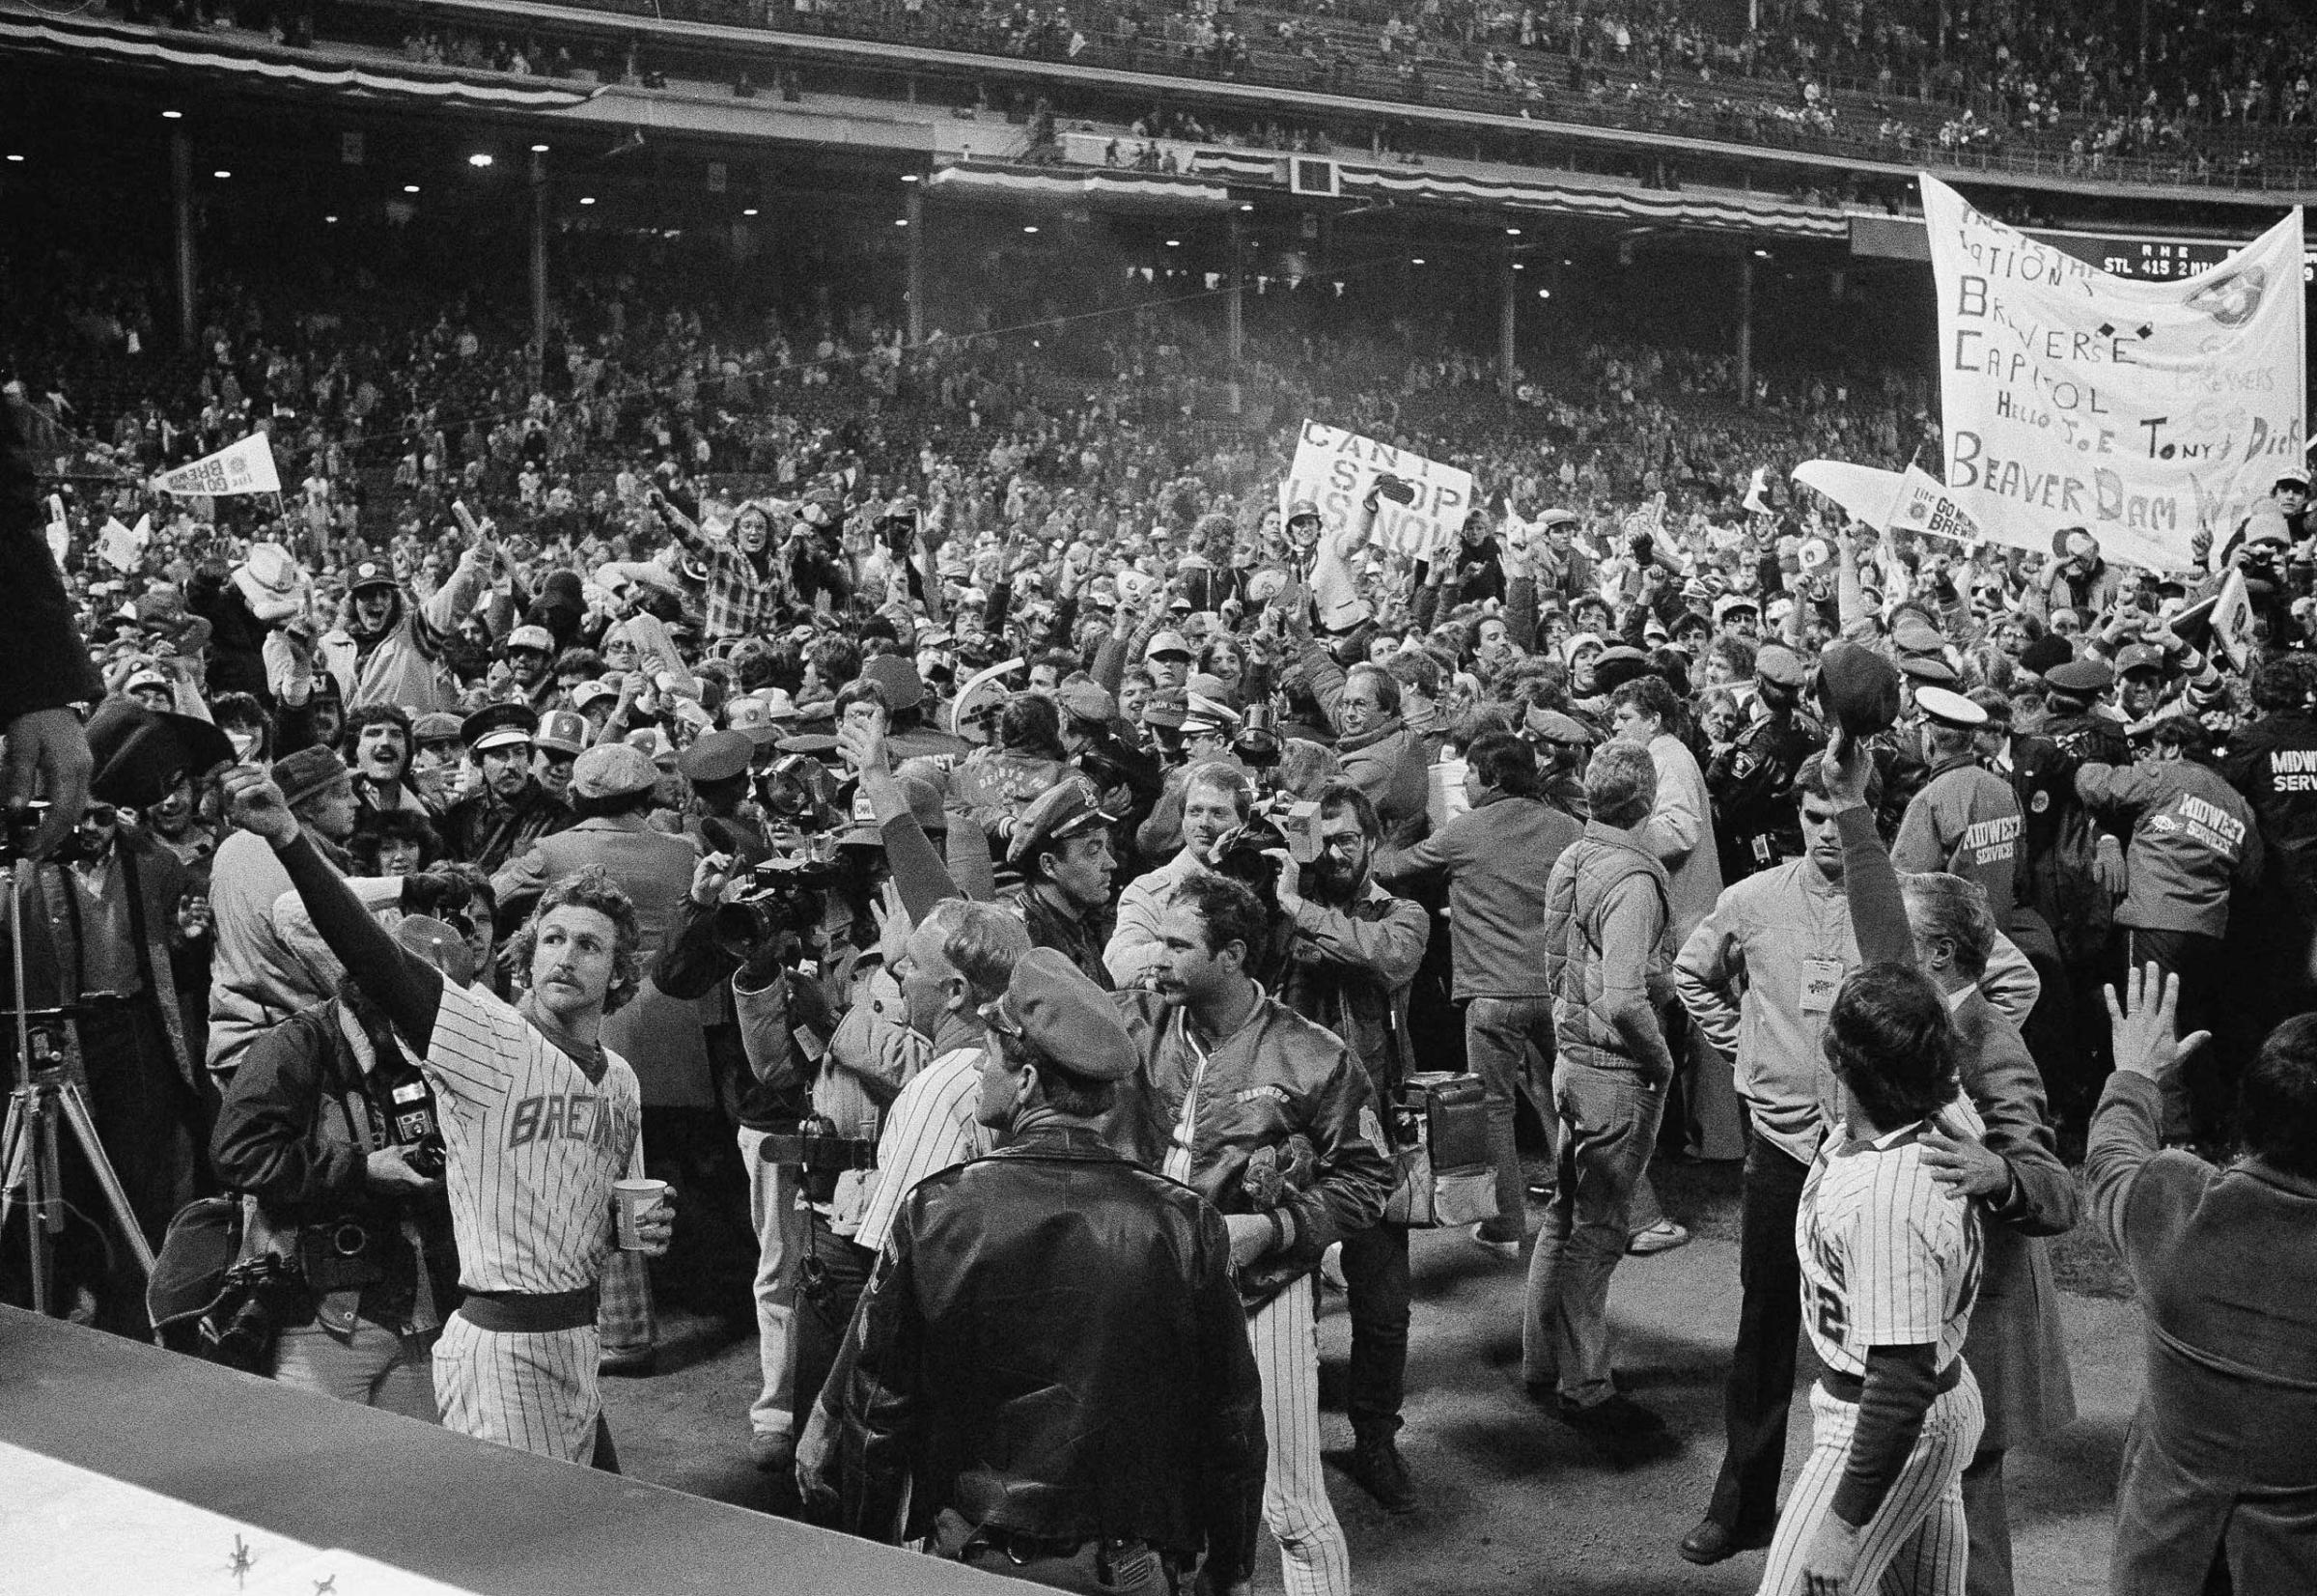 Milwaukee Brewers shortstop Robin Yount, left, waves to the crowd as they celebrate near the dugout in County Stadium after a World Series game, Sunday, Oct. 17, 1982, Milwaukee, Wi.